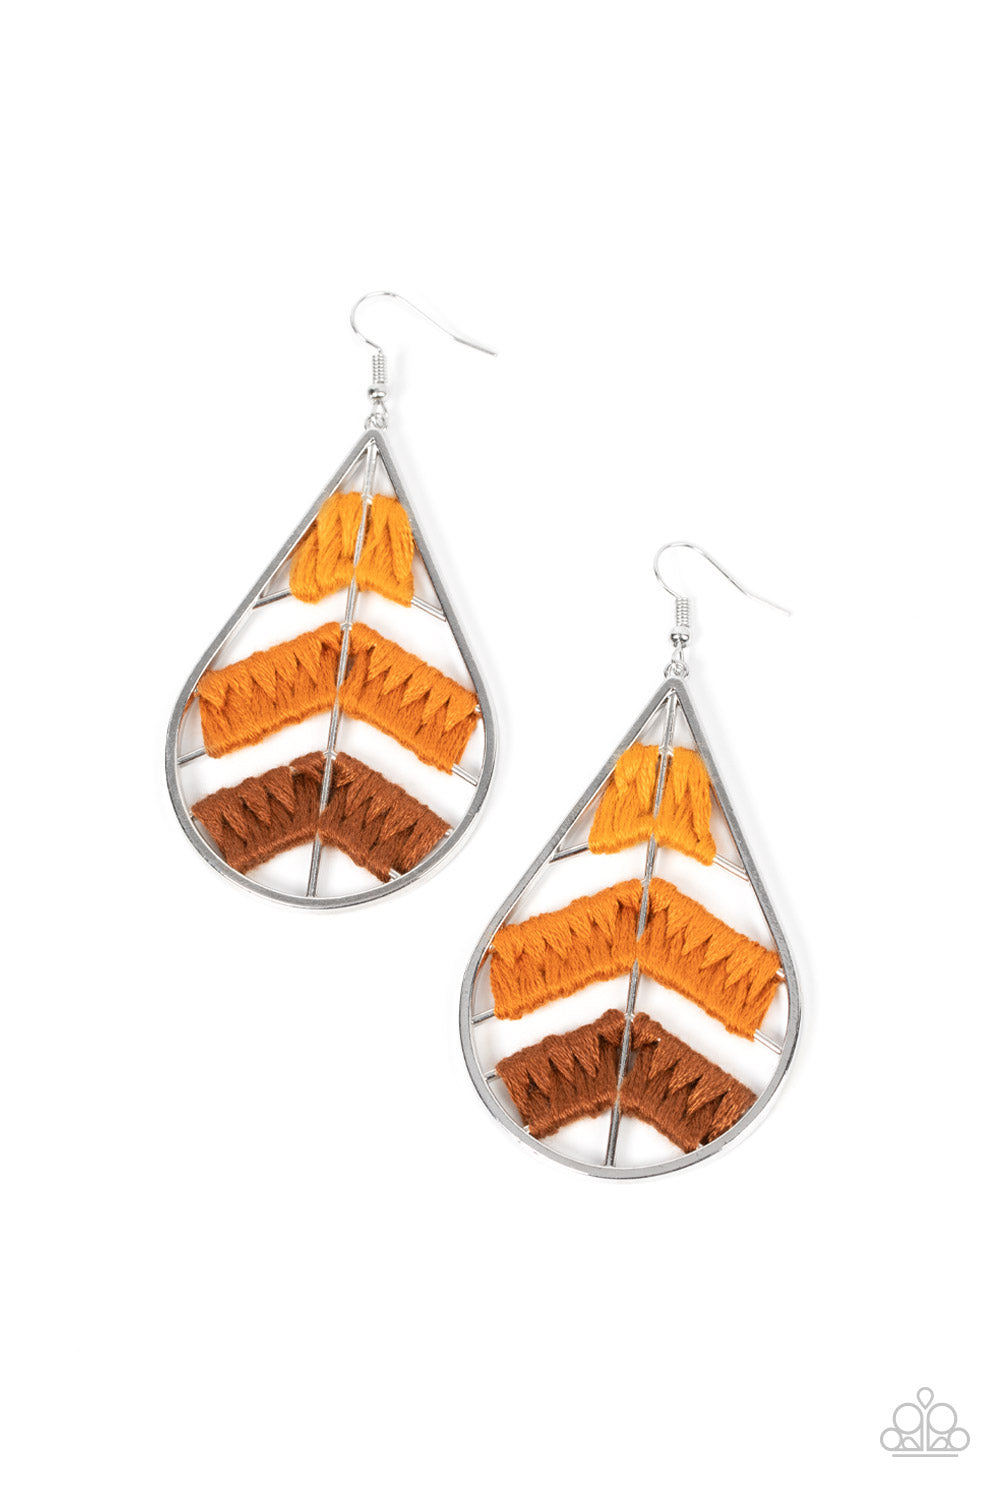 Paparazzi Accessories - Nice Threads - Orange Earrings an ombré of orange and brown threads decoratively weave along arched silver bars inside of a shiny silver teardrop, resulting in an earthy lure. Earring attaches to a standard fishhook fitting.  Sold as one pair of earrings.